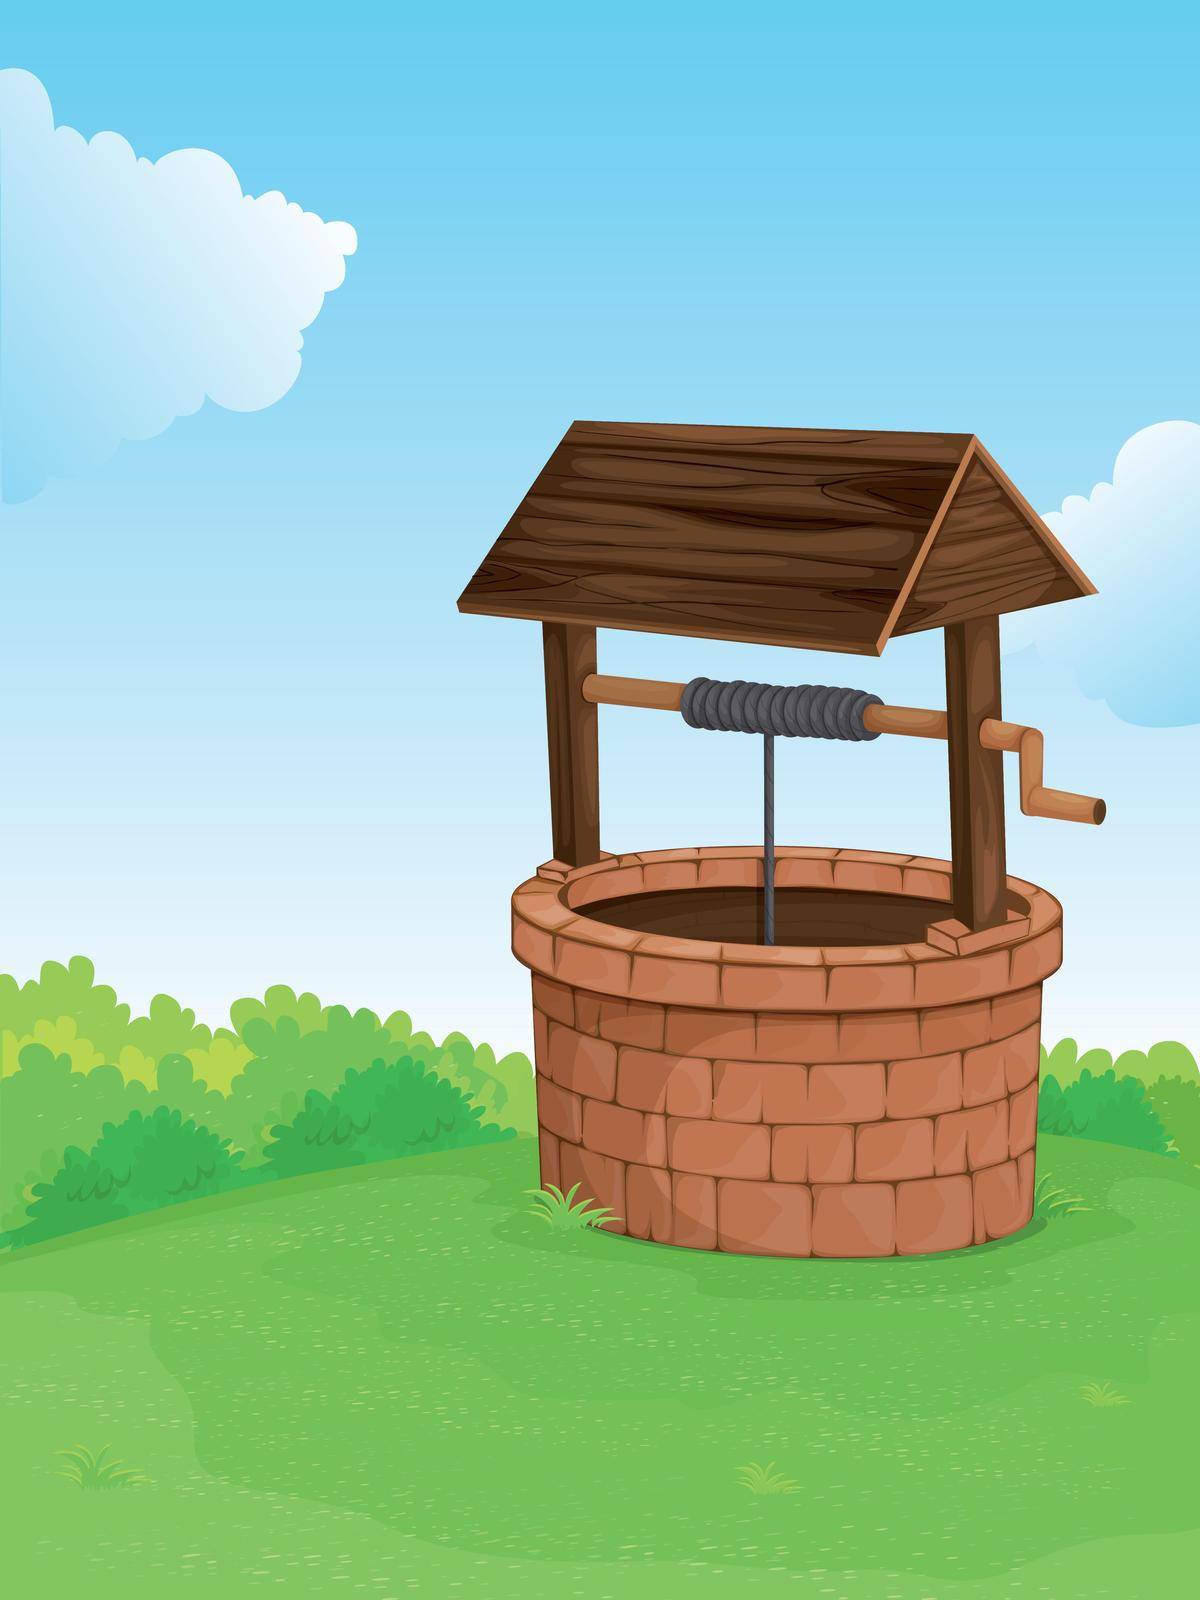 Illustration of a well on a hill